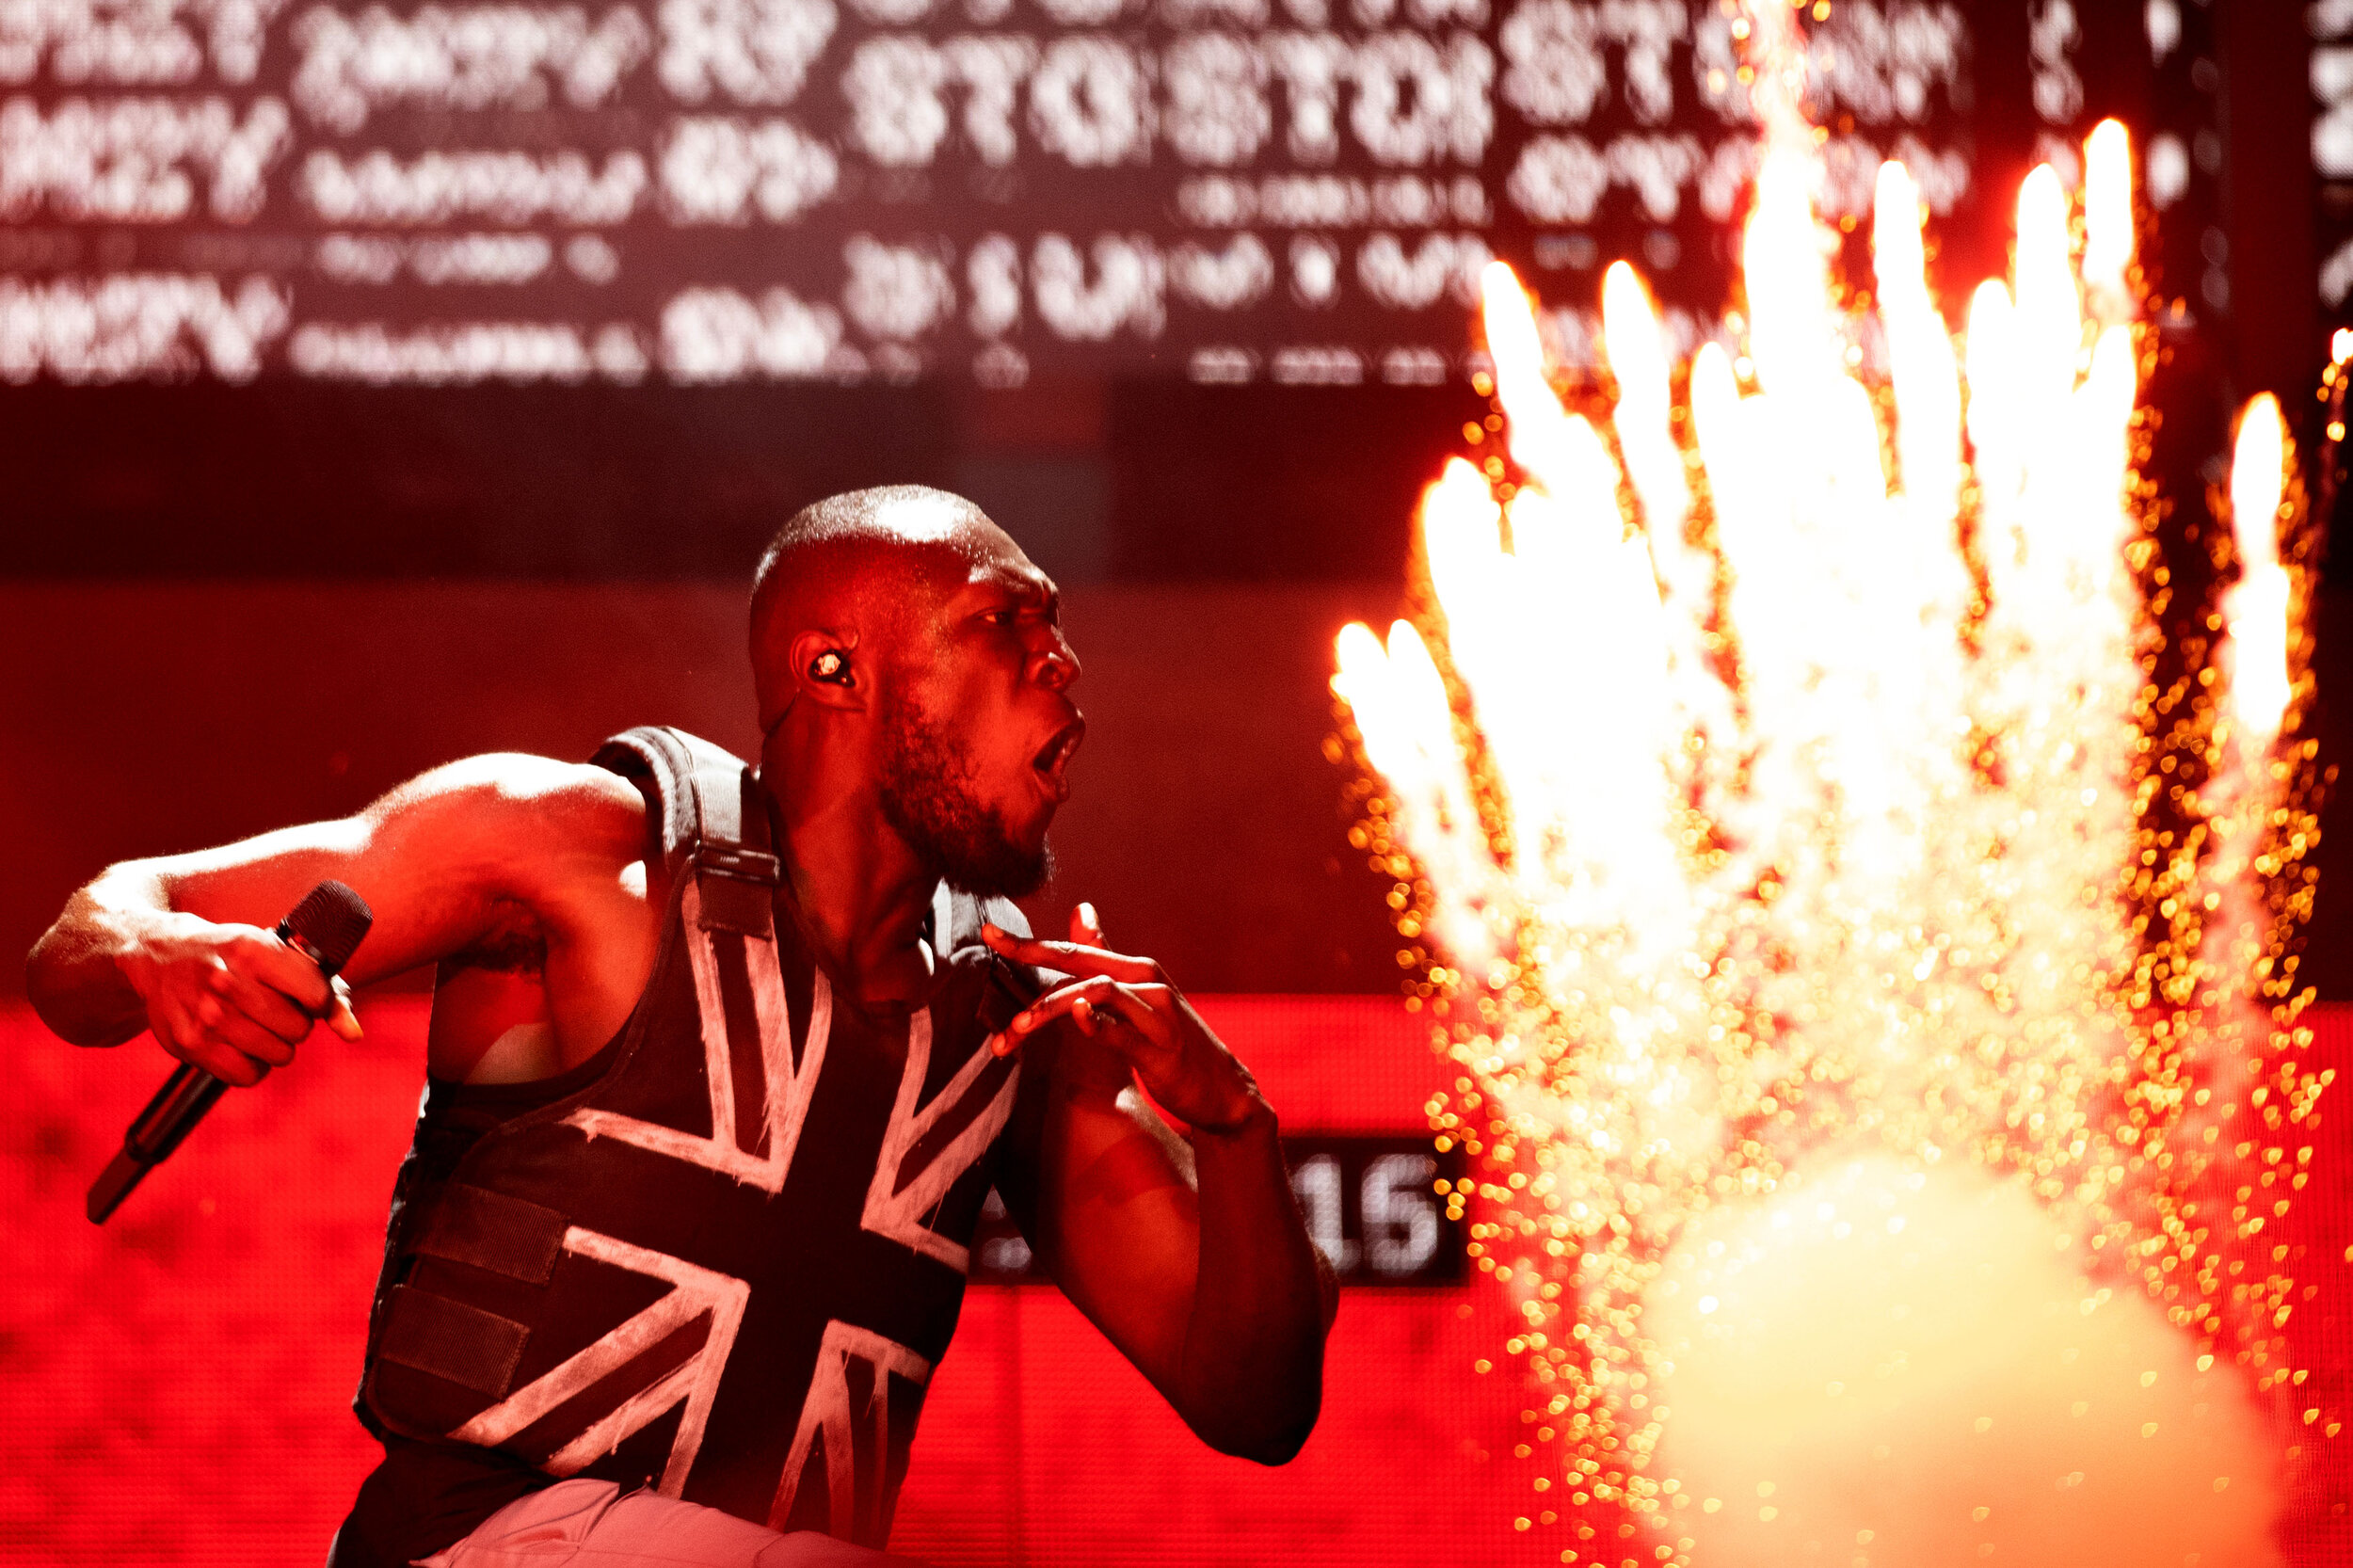  Stormzy performing on the Pyramid Stage during the Glastonbury Festival at Worthy Farm in Pilton, Somerset. Date taken: 28-Jun-2019 